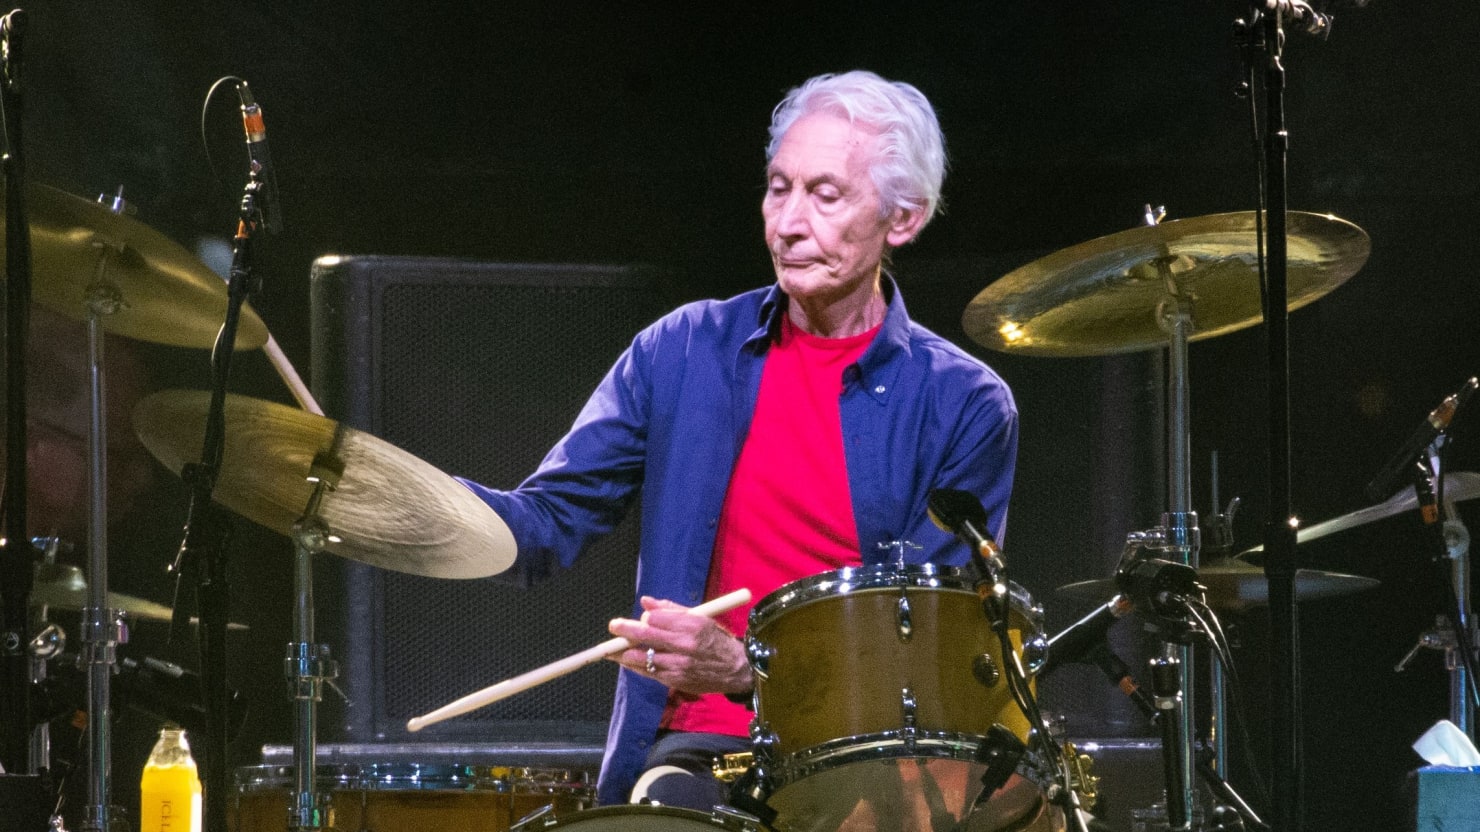 Rolling Stones Drummer Charlie Watts Dies Weeks After Dropping Out of U.S. Tour